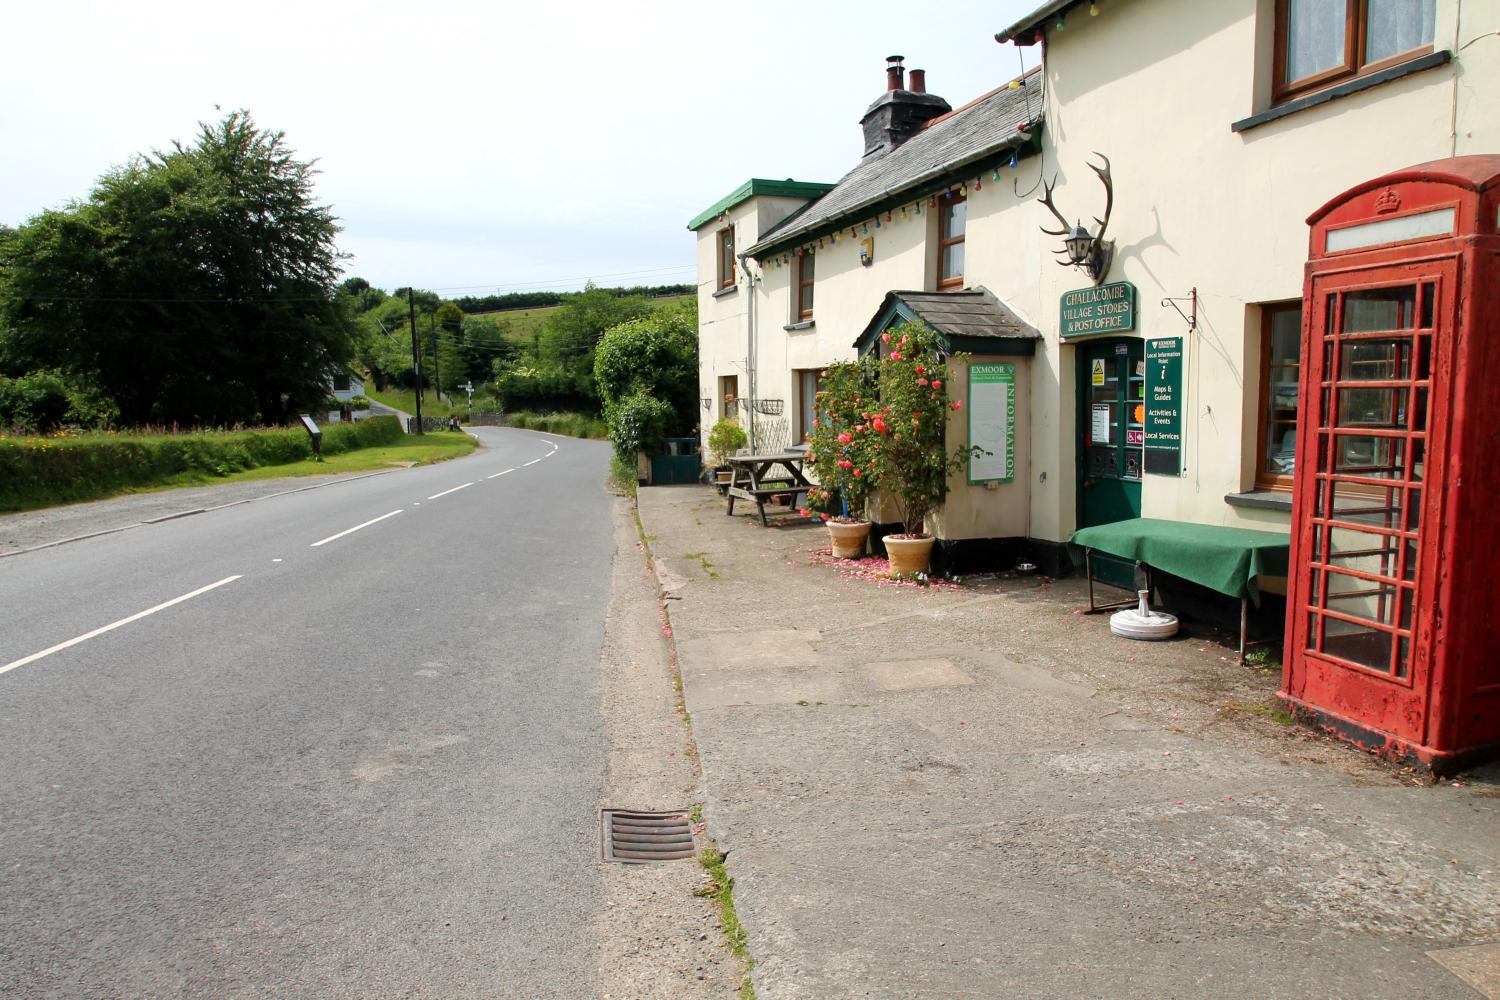 Nearby Challacombe Post Office and Stores